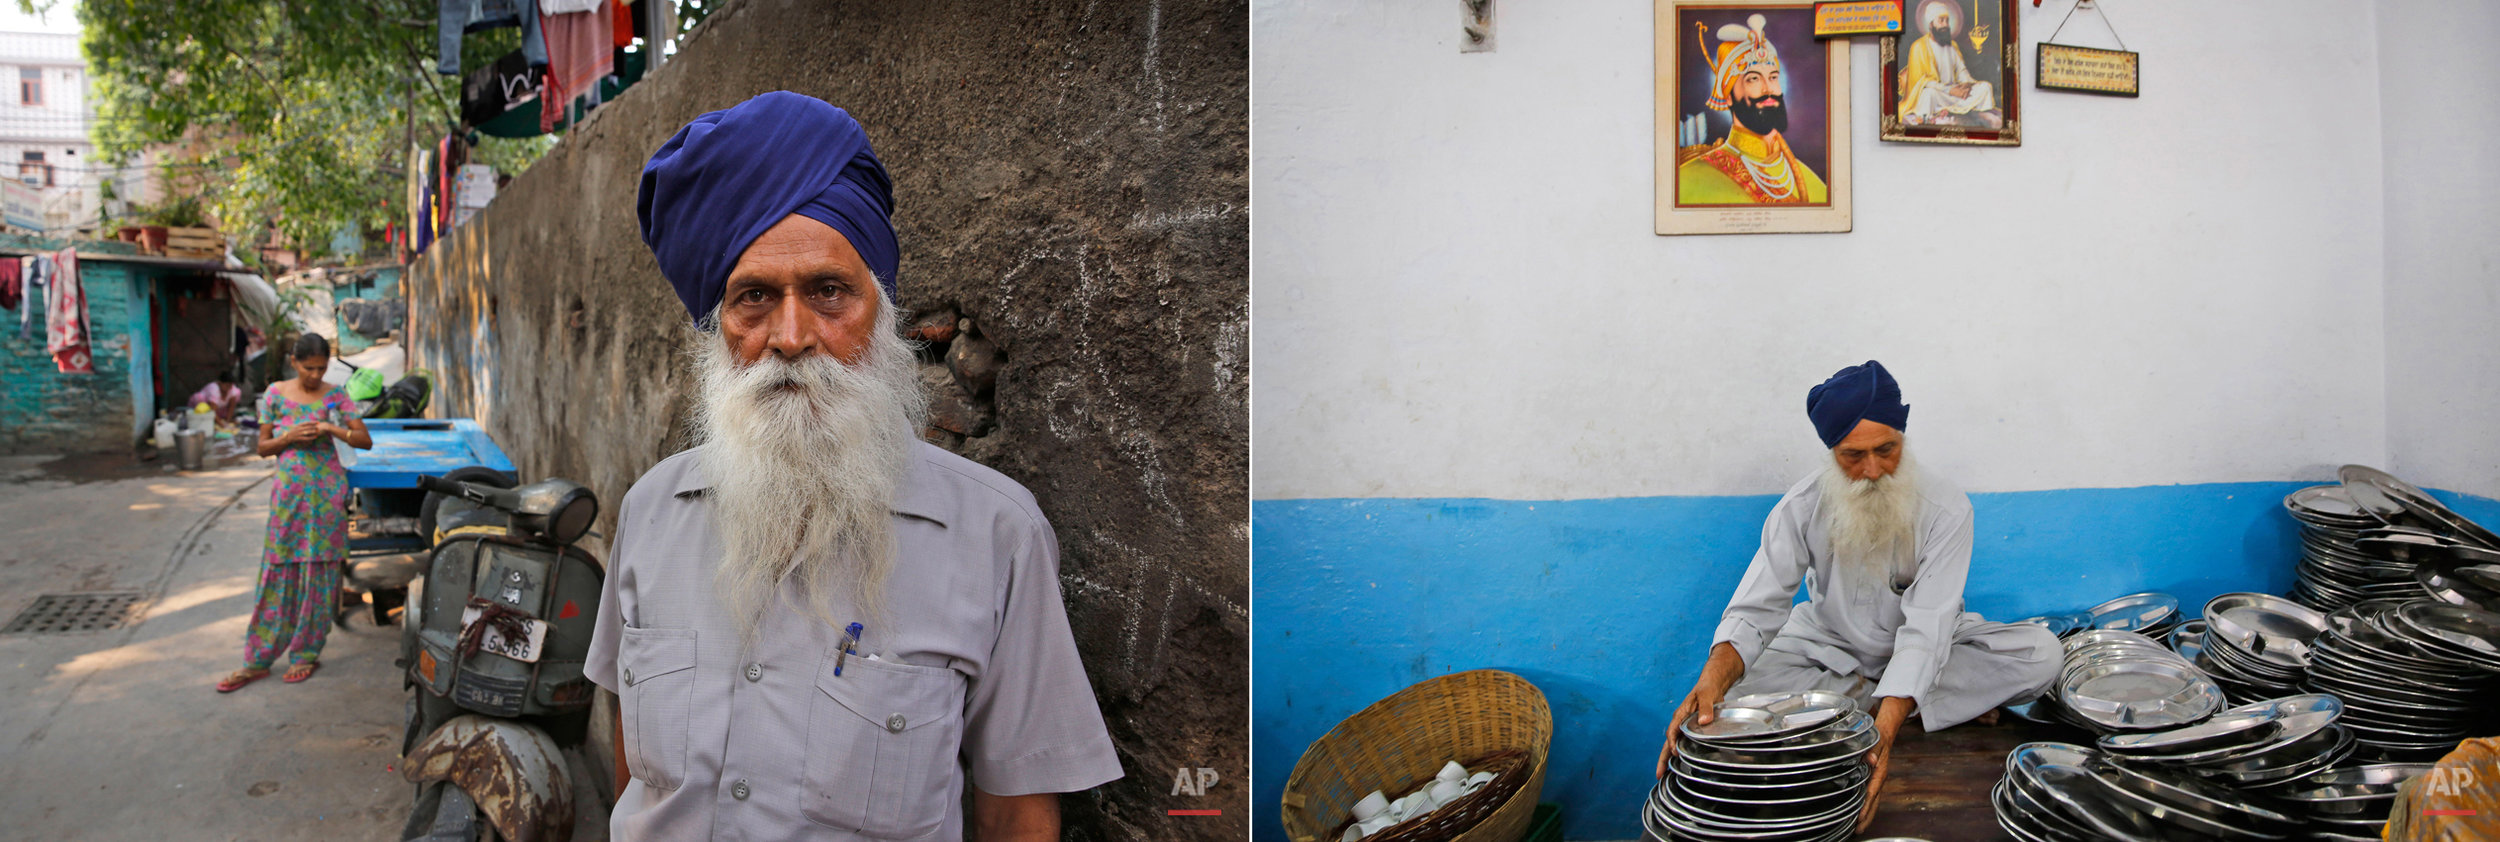  This two picture combo shows on left, Jaspal Singh, 74, poses for photos outside his house in New Delhi, India, on June 15, 2015, as on right, he arranges empty plates for langar, or free community meal, at Majnu-ka-Tilla Gurudwara or Sikh temple, i